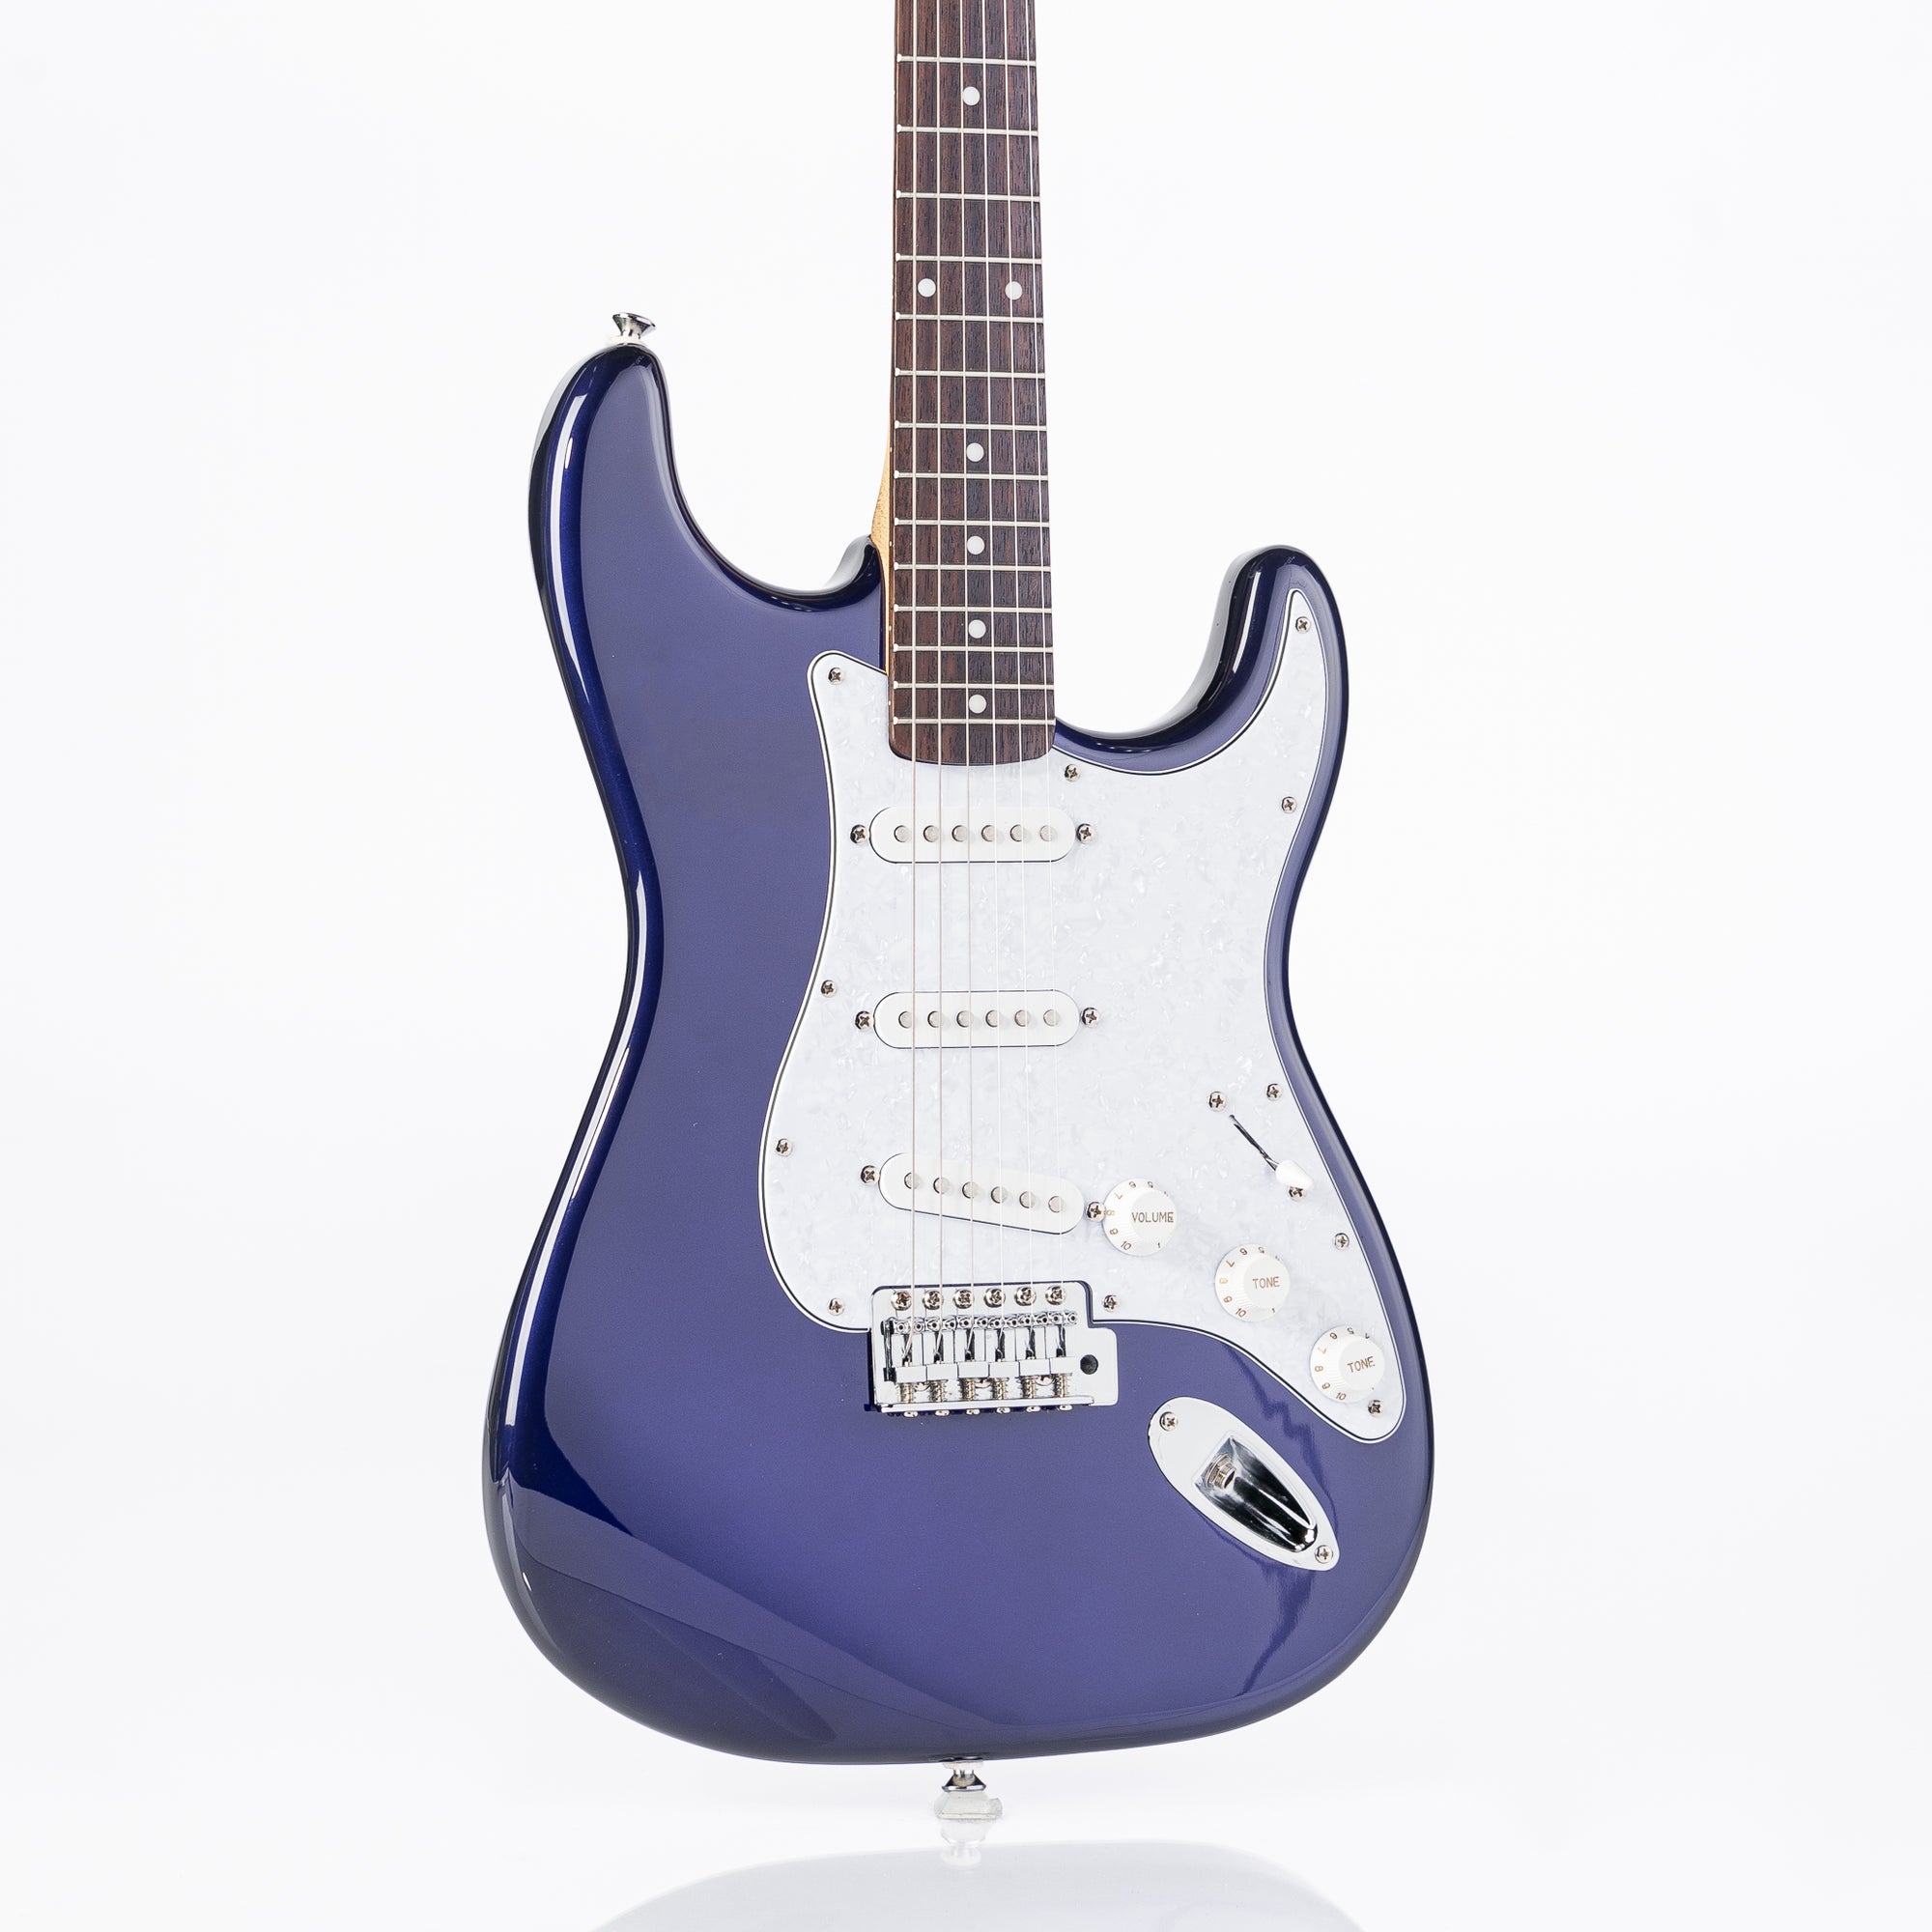 USED Squier Affinity Strat Electric Guitar- Metallic Blue w/bag